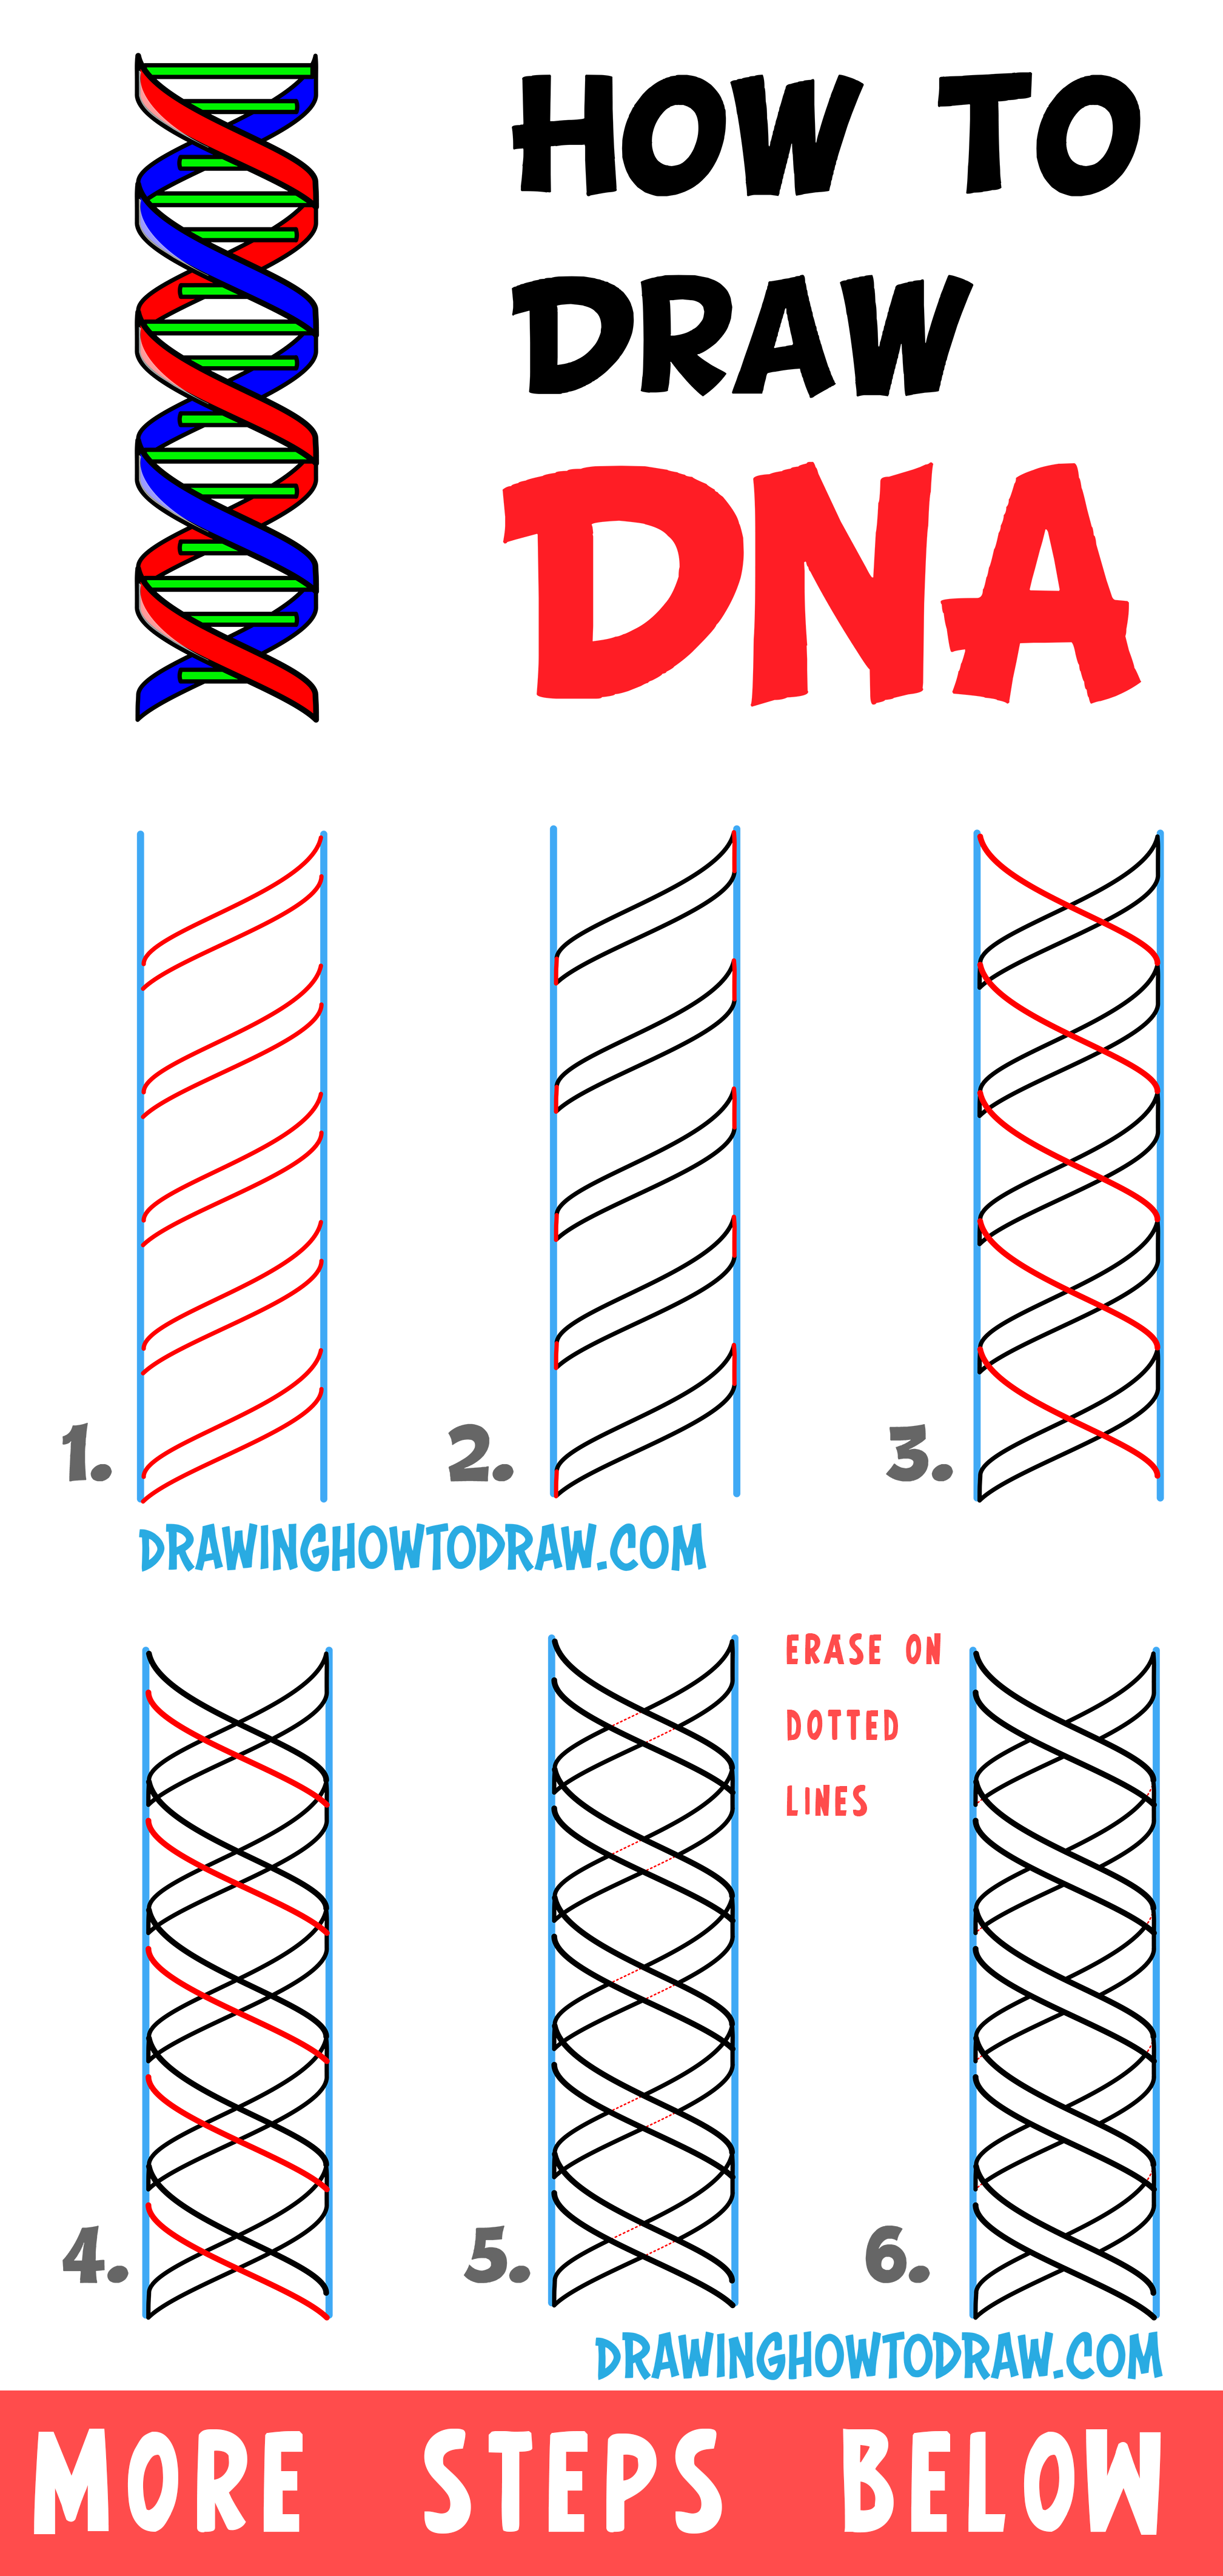 Learn How to Draw DNA Double Helix Structure - Easy Step-by-Step Drawing Tutorial